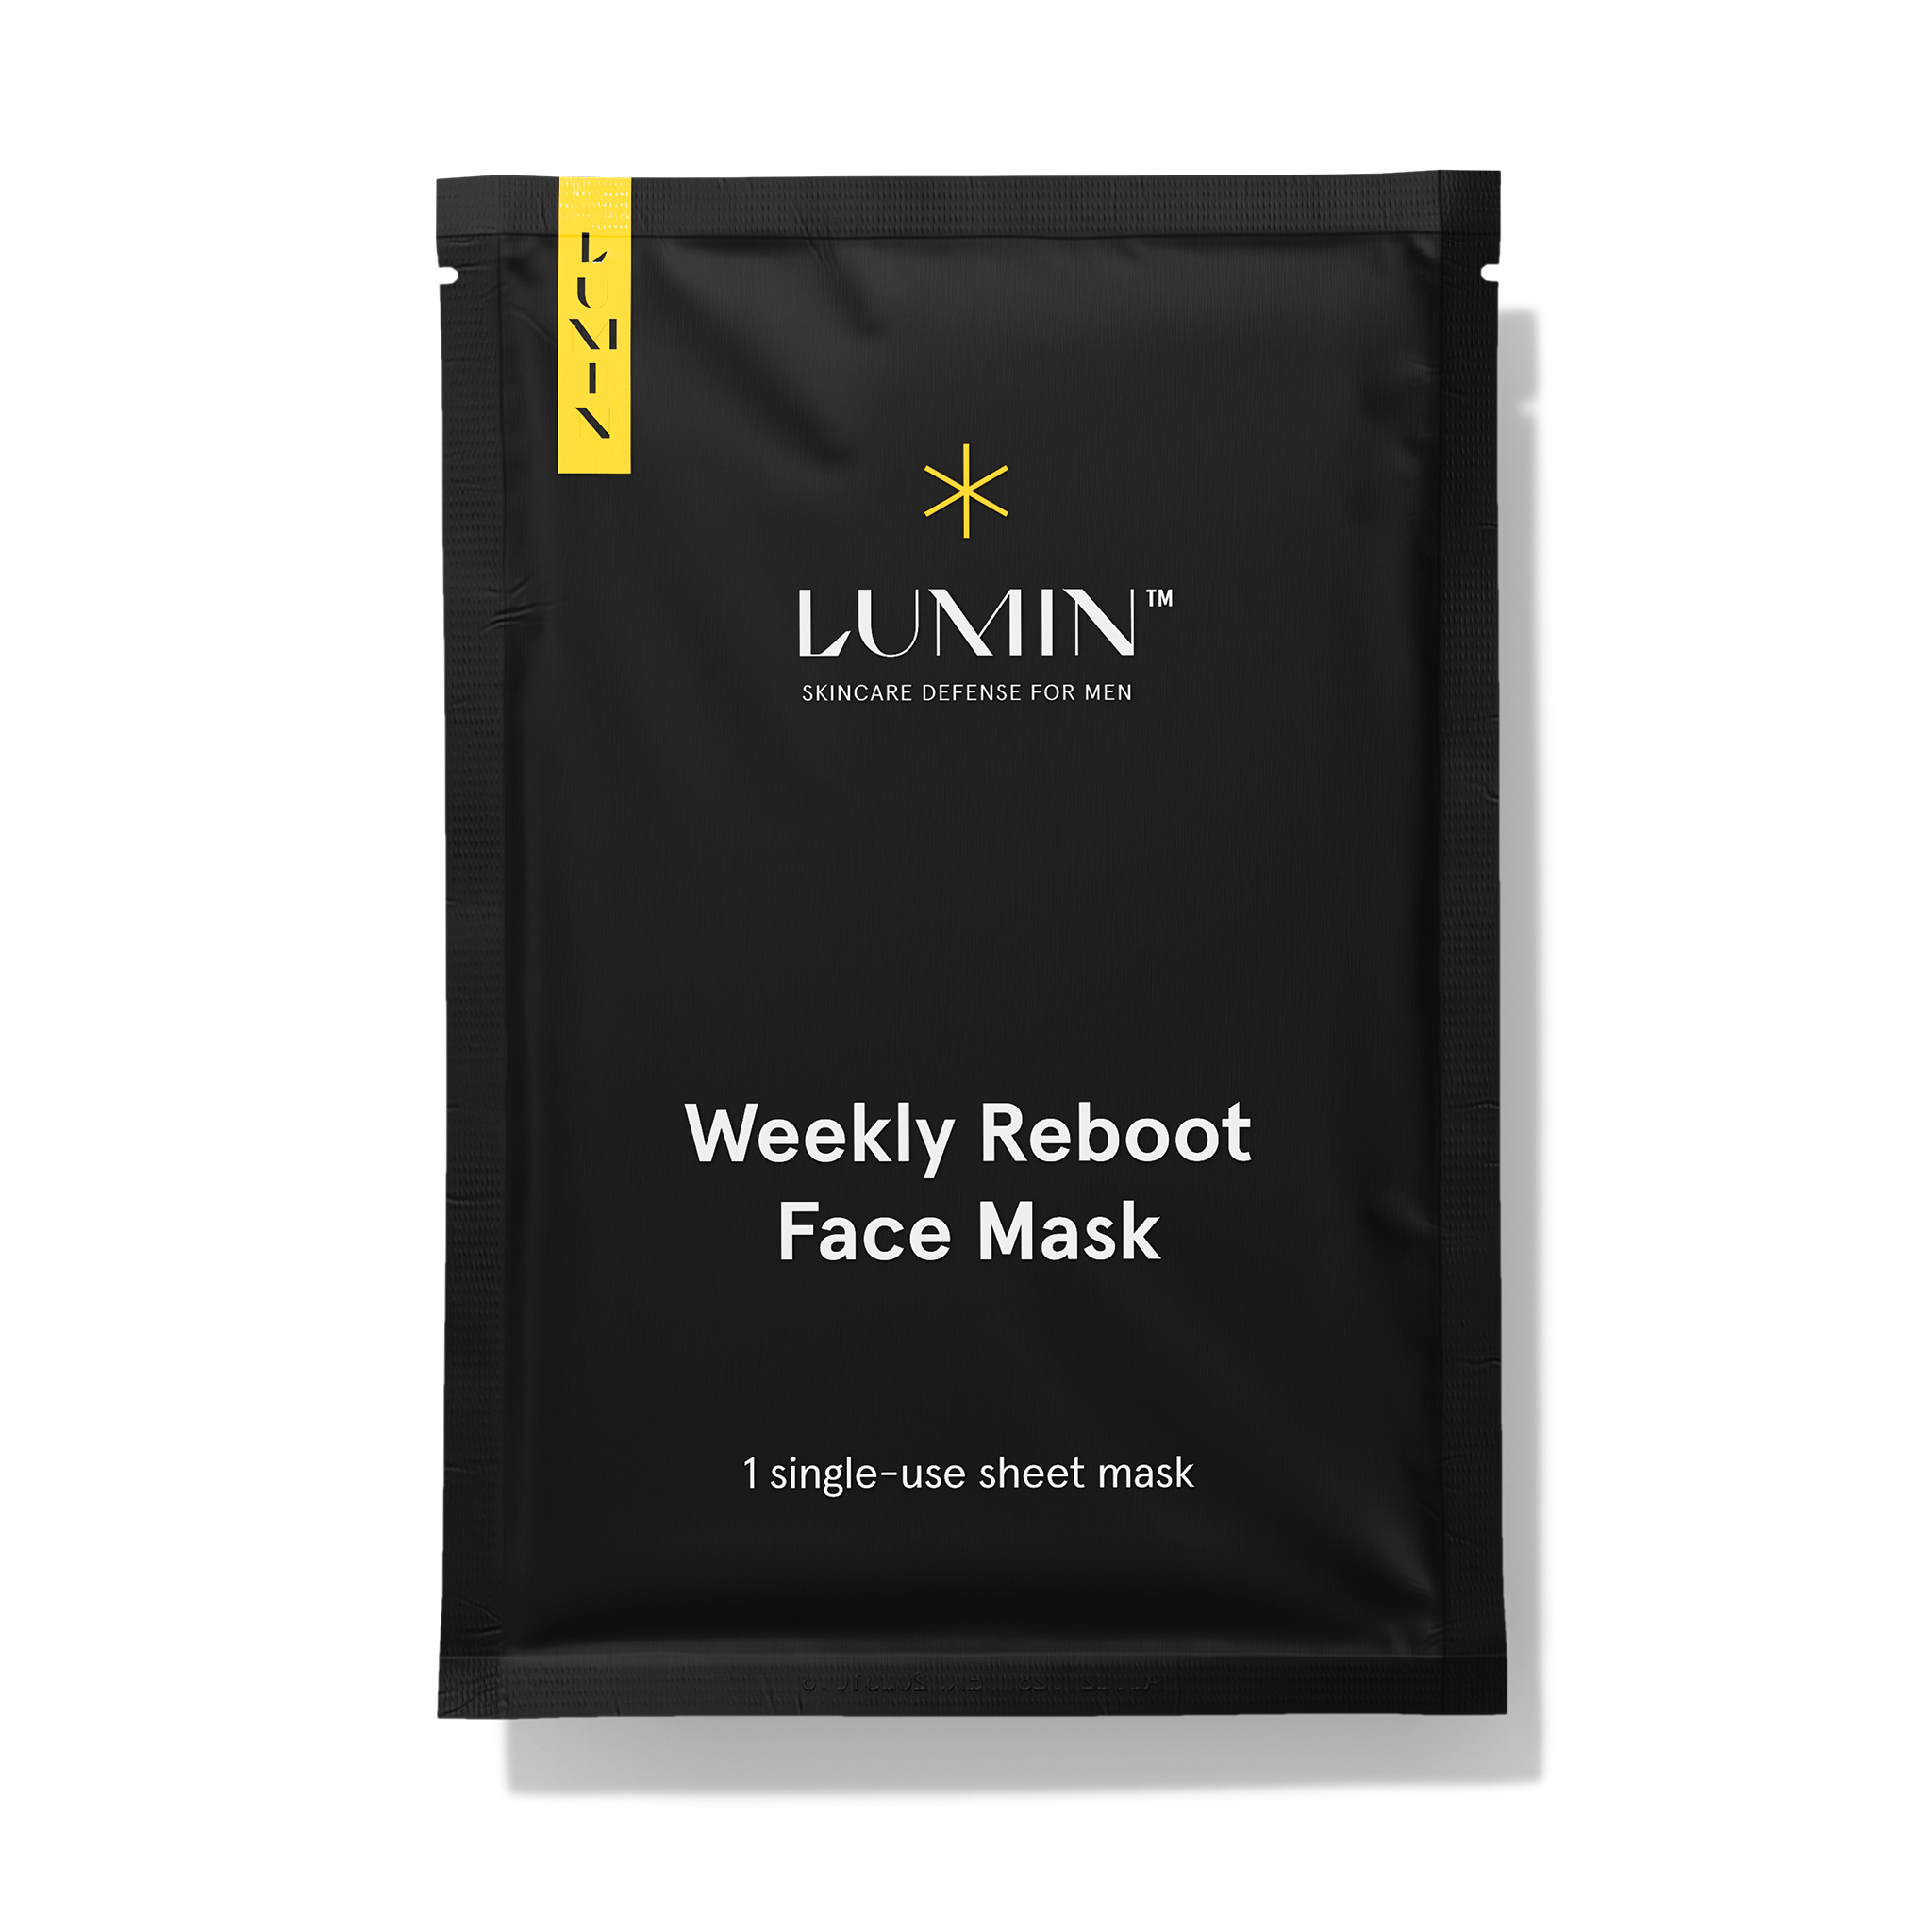 Weekly Reboot Face Mask